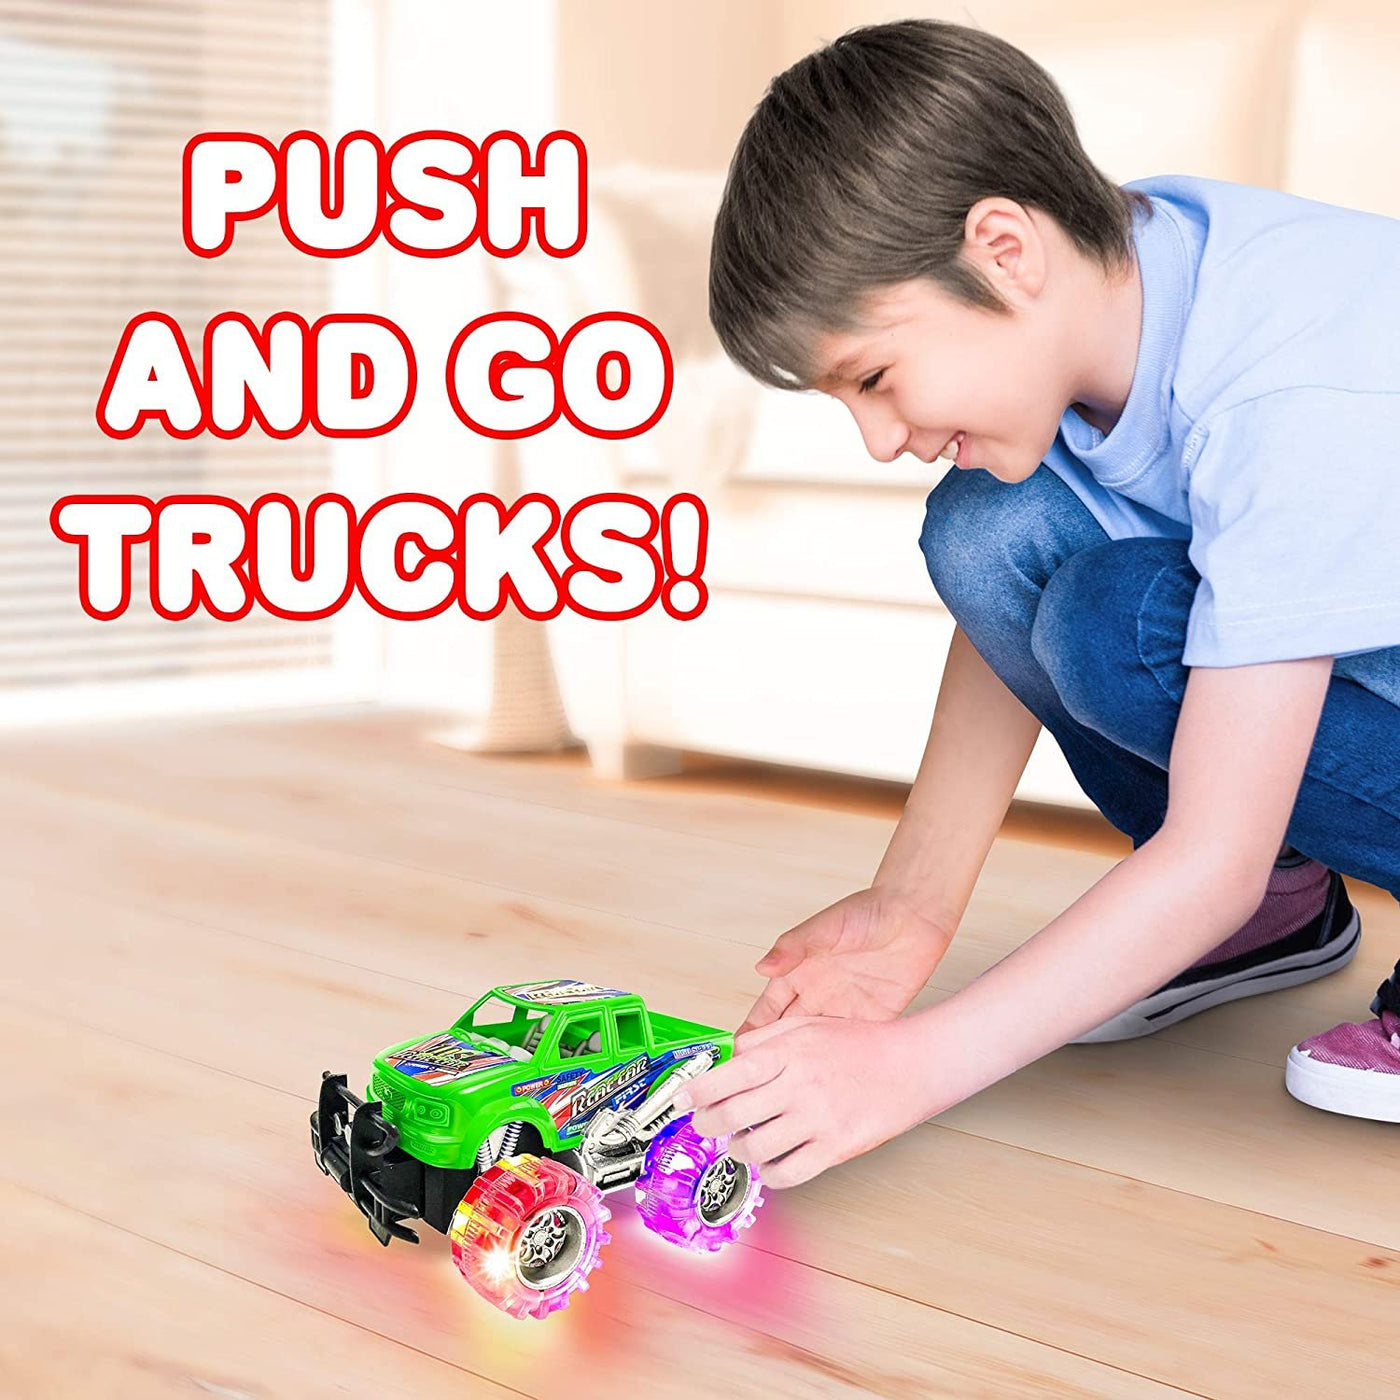 ArtCreativity Pink and Green Light Up Monster Truck Set for Boys and Girls, Set Includes 2, 6 Inch Monster Trucks with Beautiful Flashing LED Tires, Push n Go Toy Cars, Best Gift for Kids, for Ages 3+